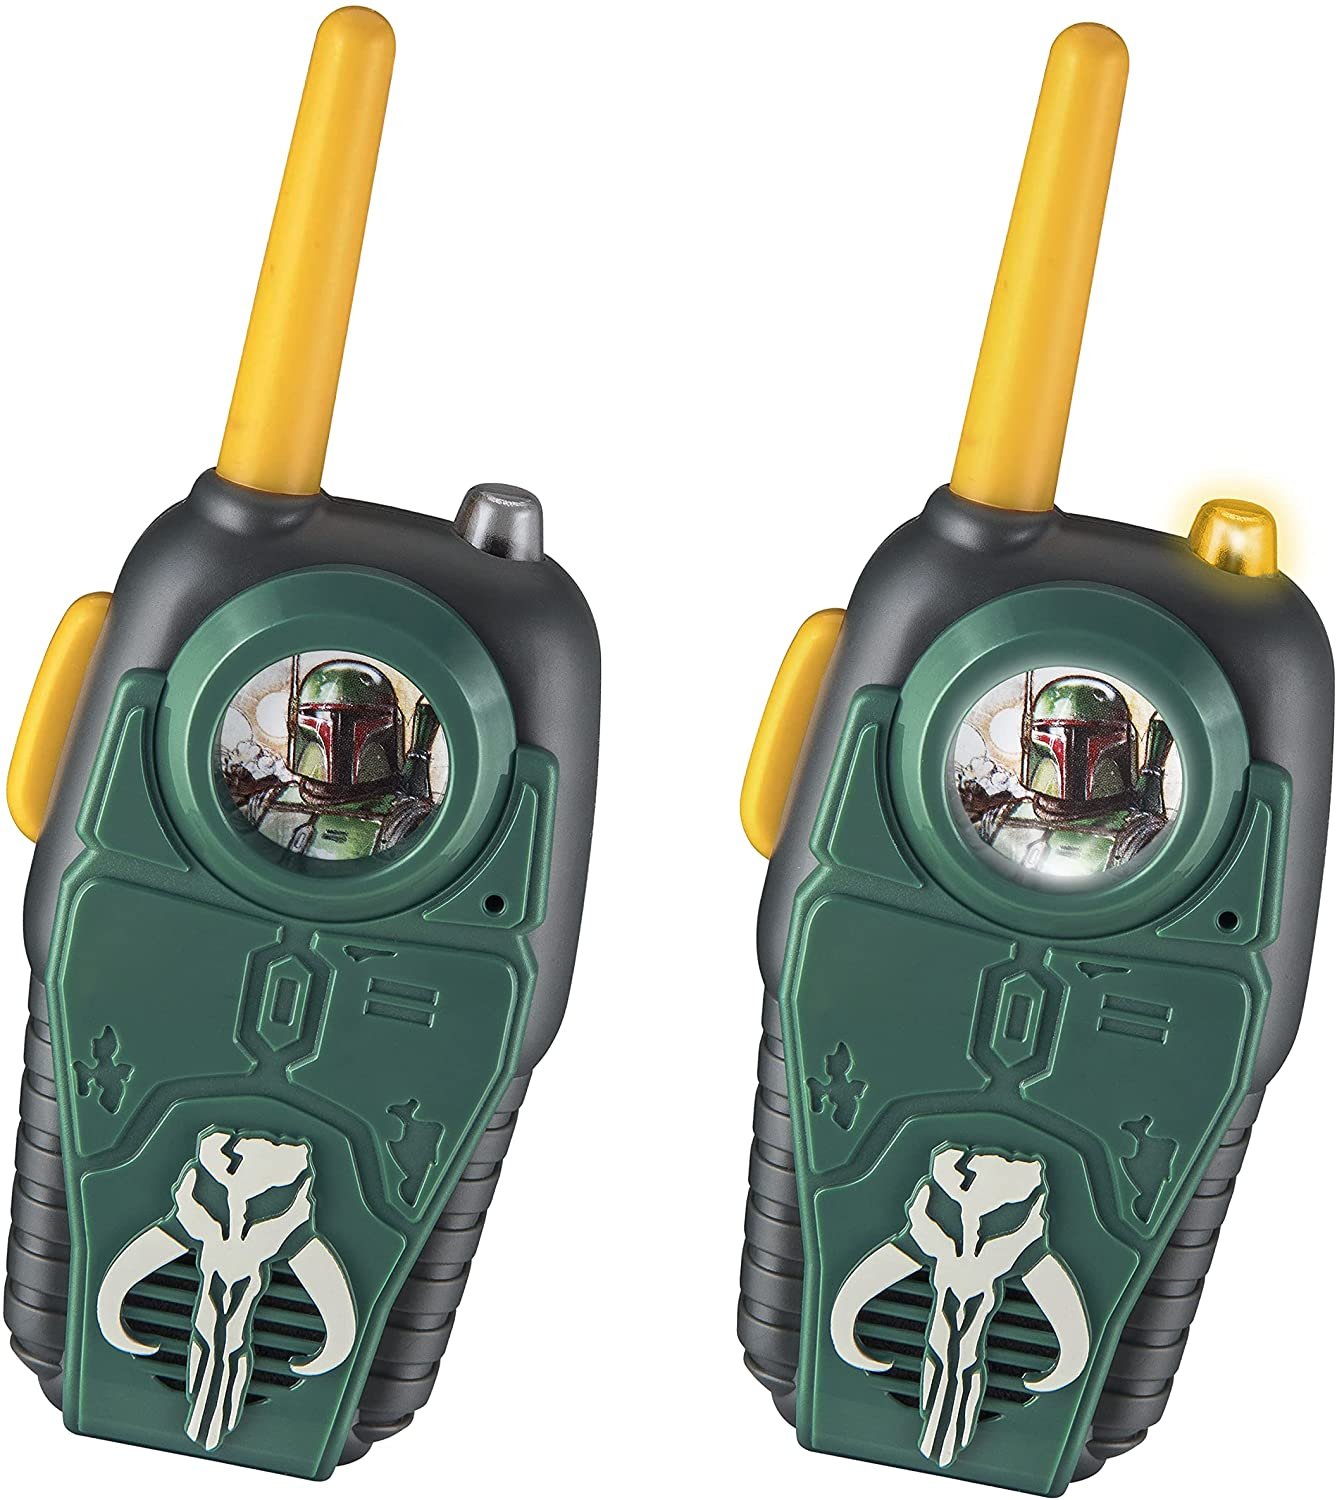 ekids The Book of Boba Fett Toy Walkie Talkies for Kids, Two Way Radios for Indoor and Outdoor Games - image 1 of 7